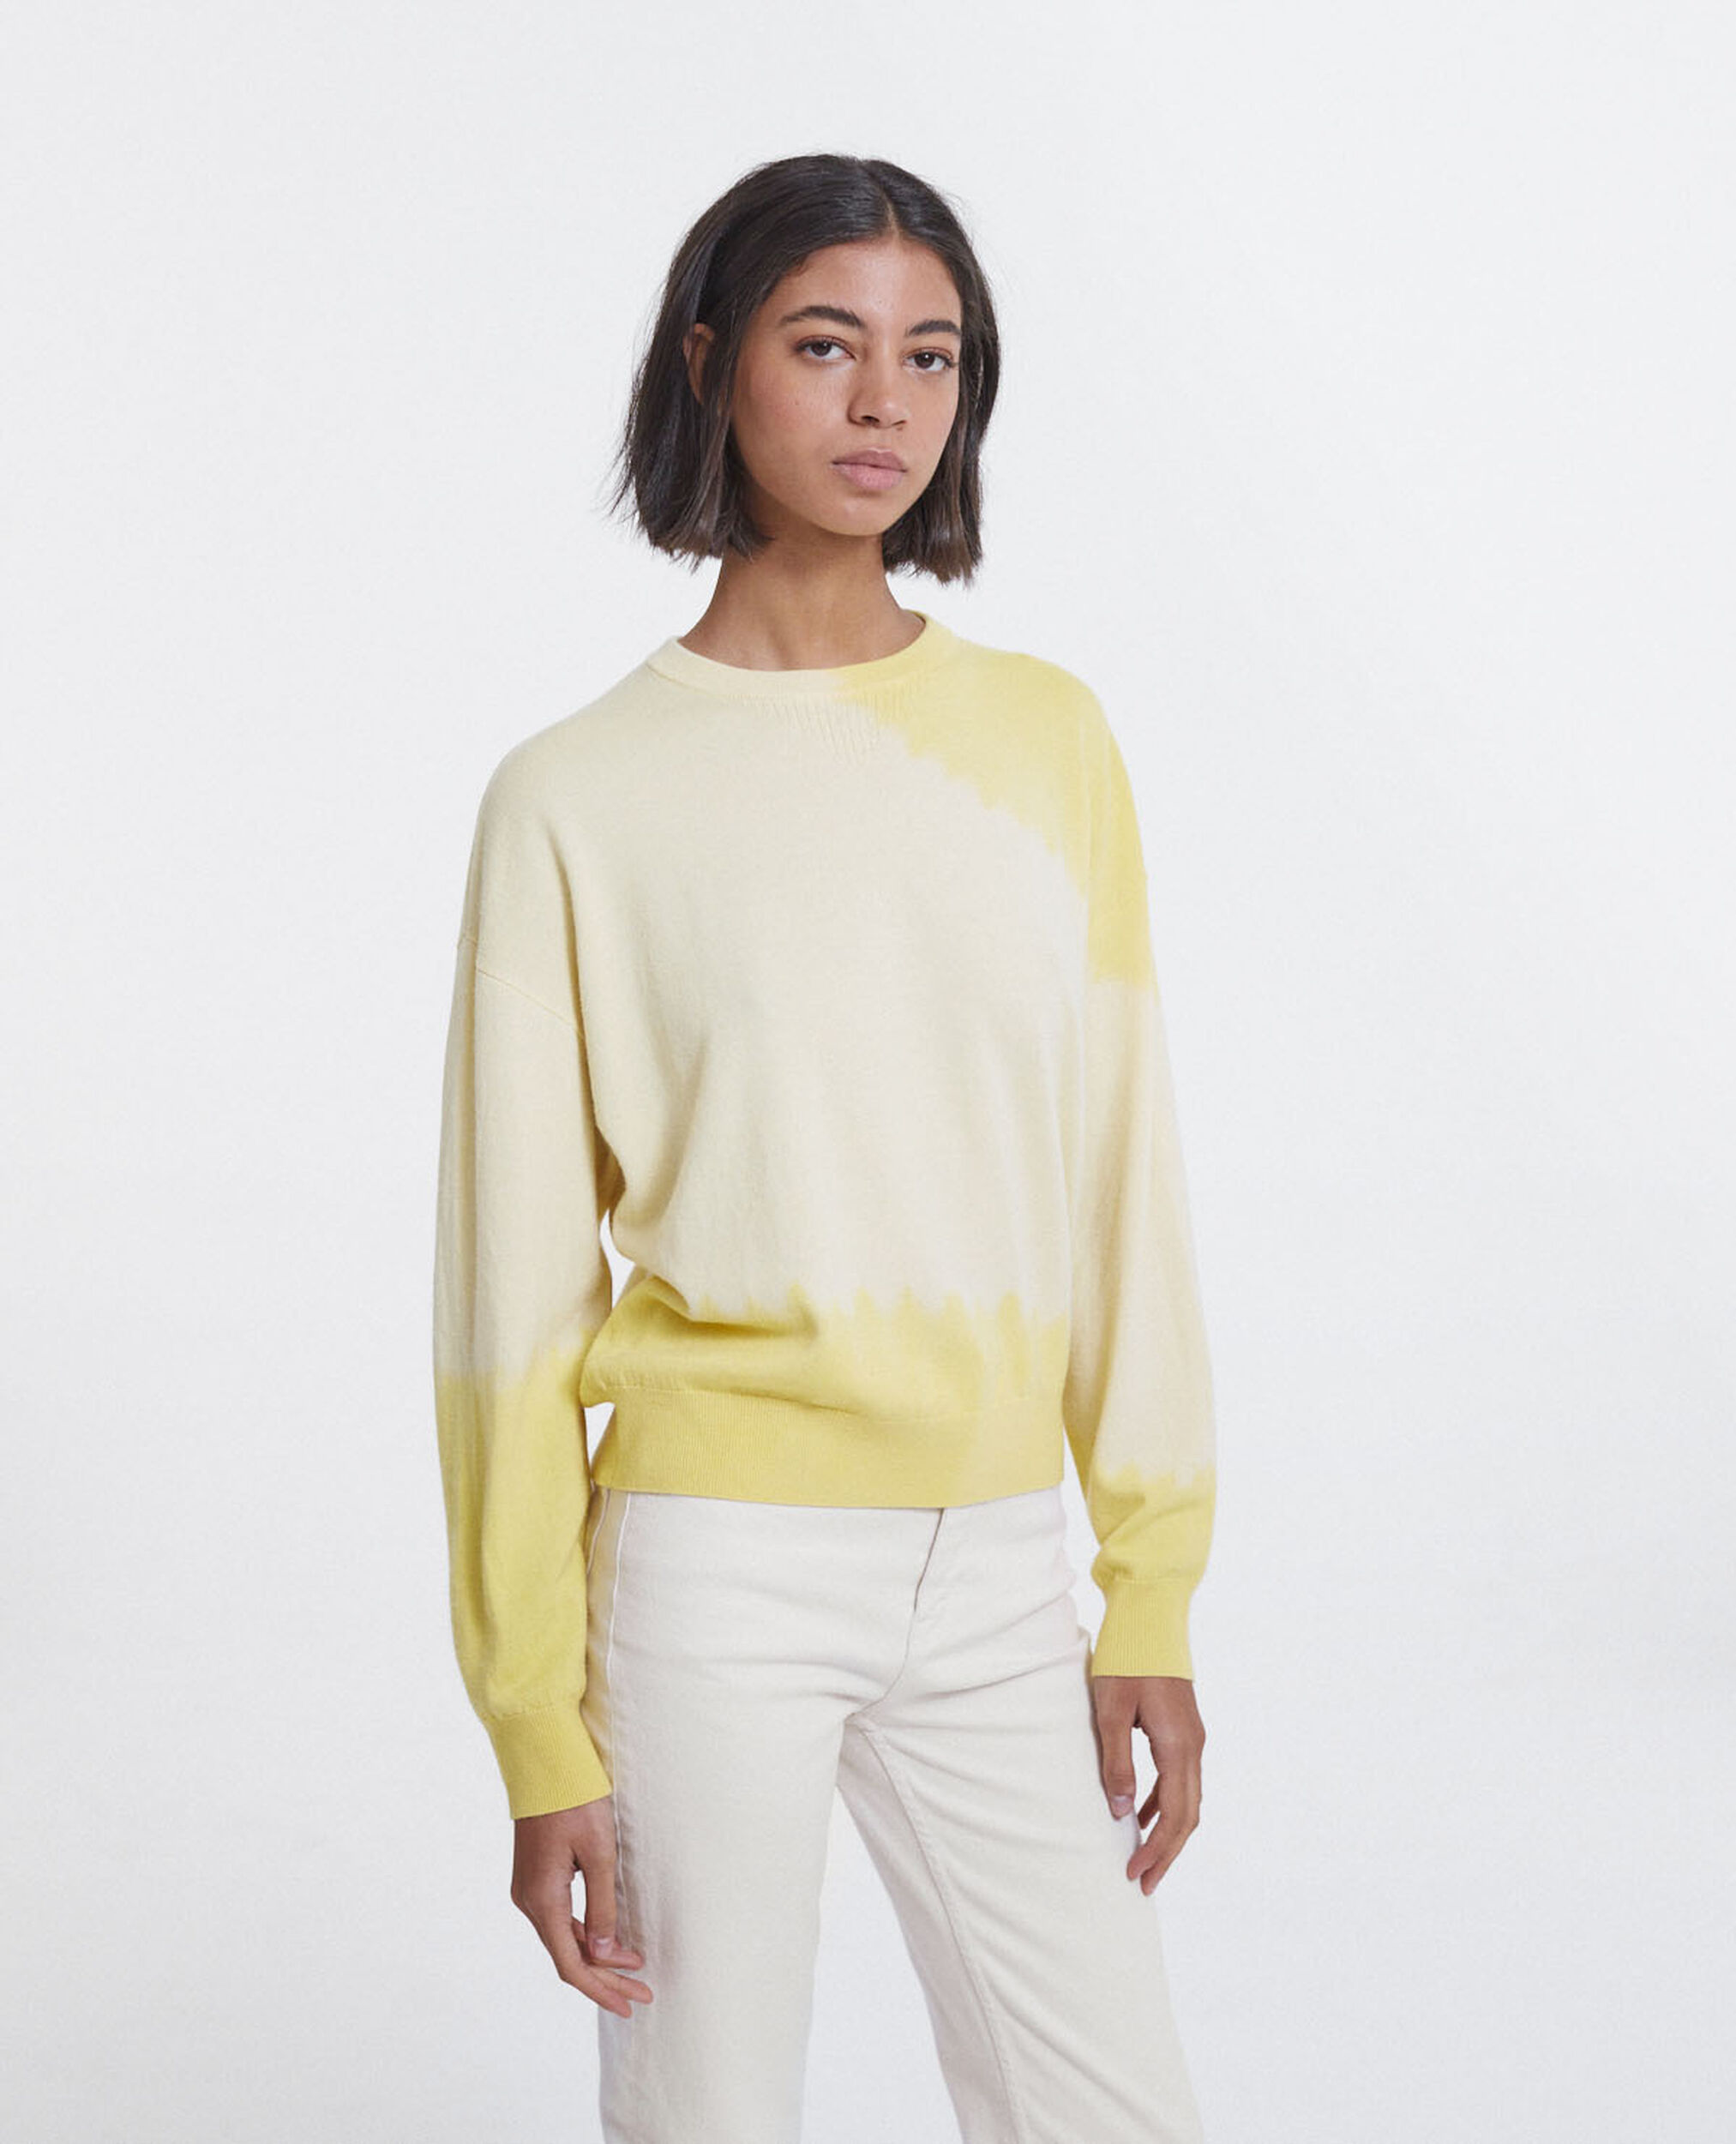 Yellow tie-dye effect wool sweater, YELLOW, hi-res image number null